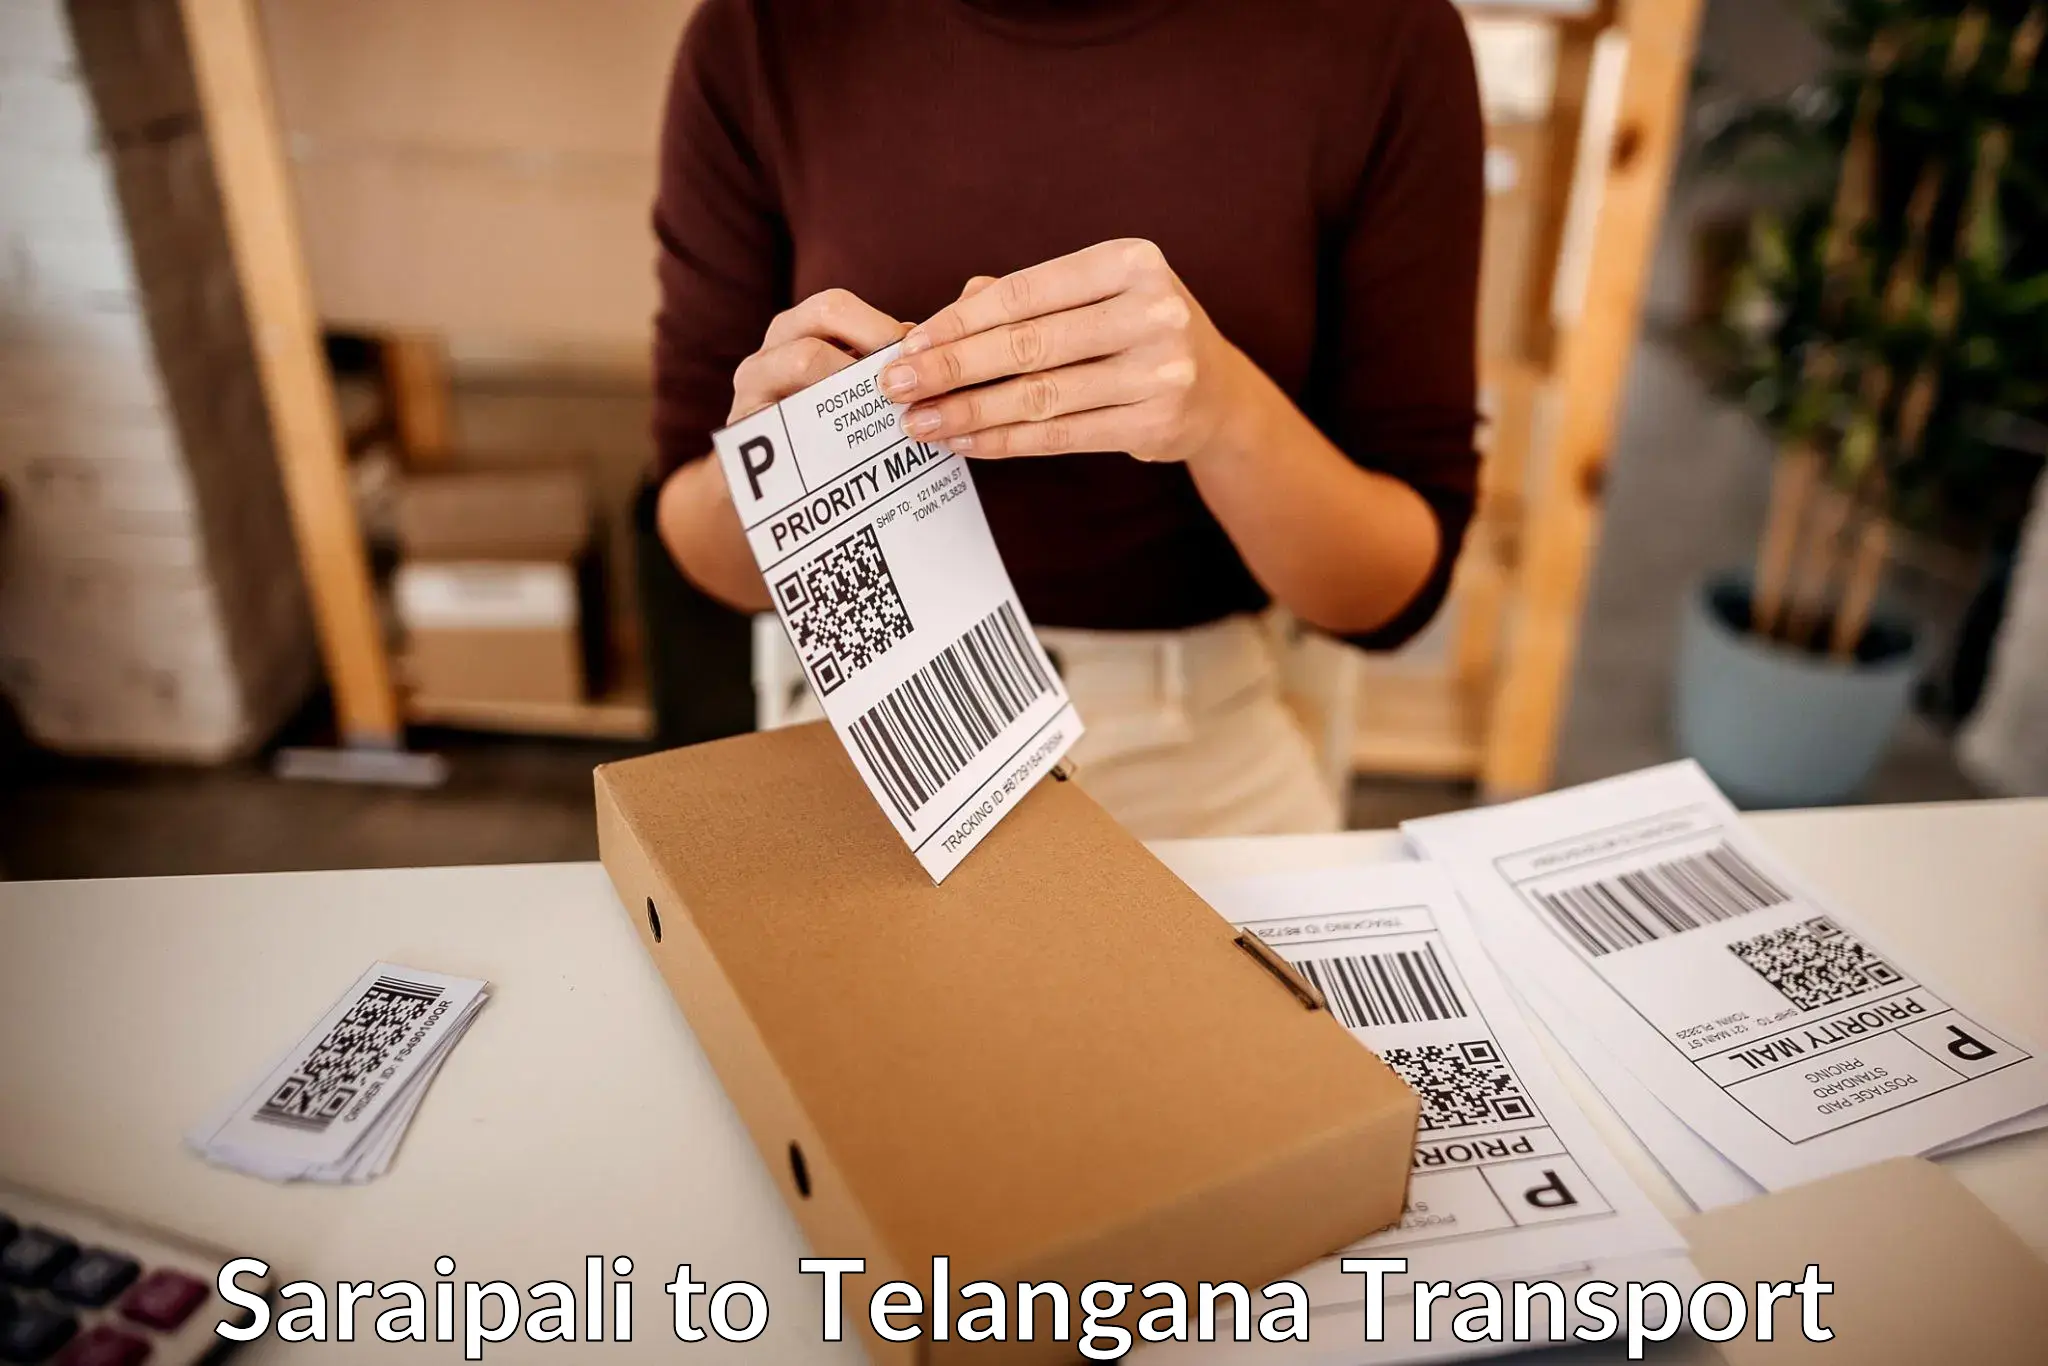 Daily parcel service transport in Saraipali to Telangana